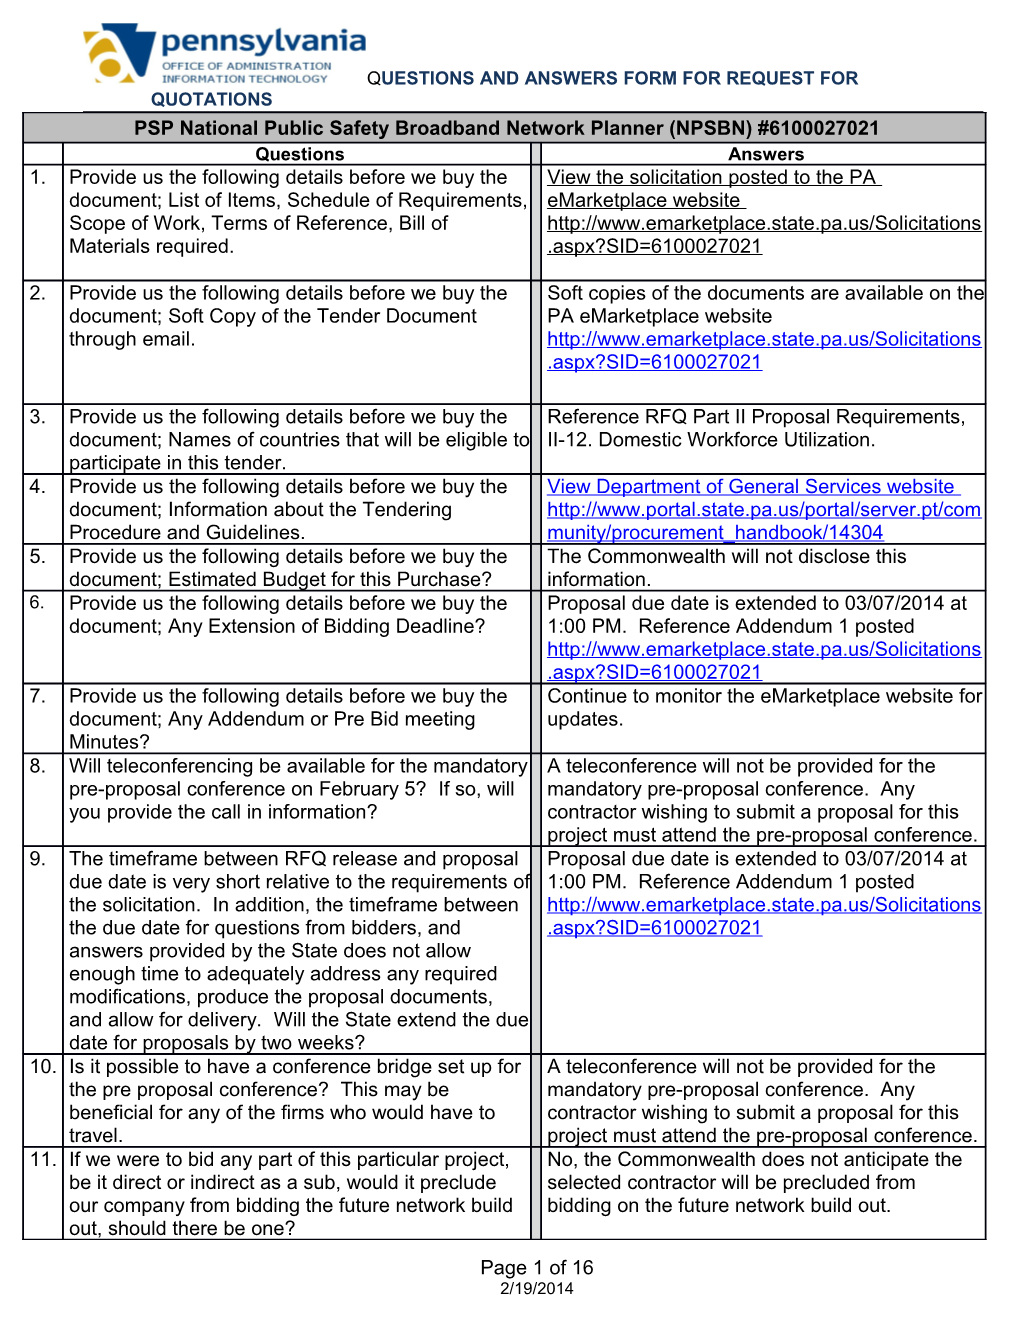 Questions and Answers Form for Request for Quotations Updated 02/26/2014